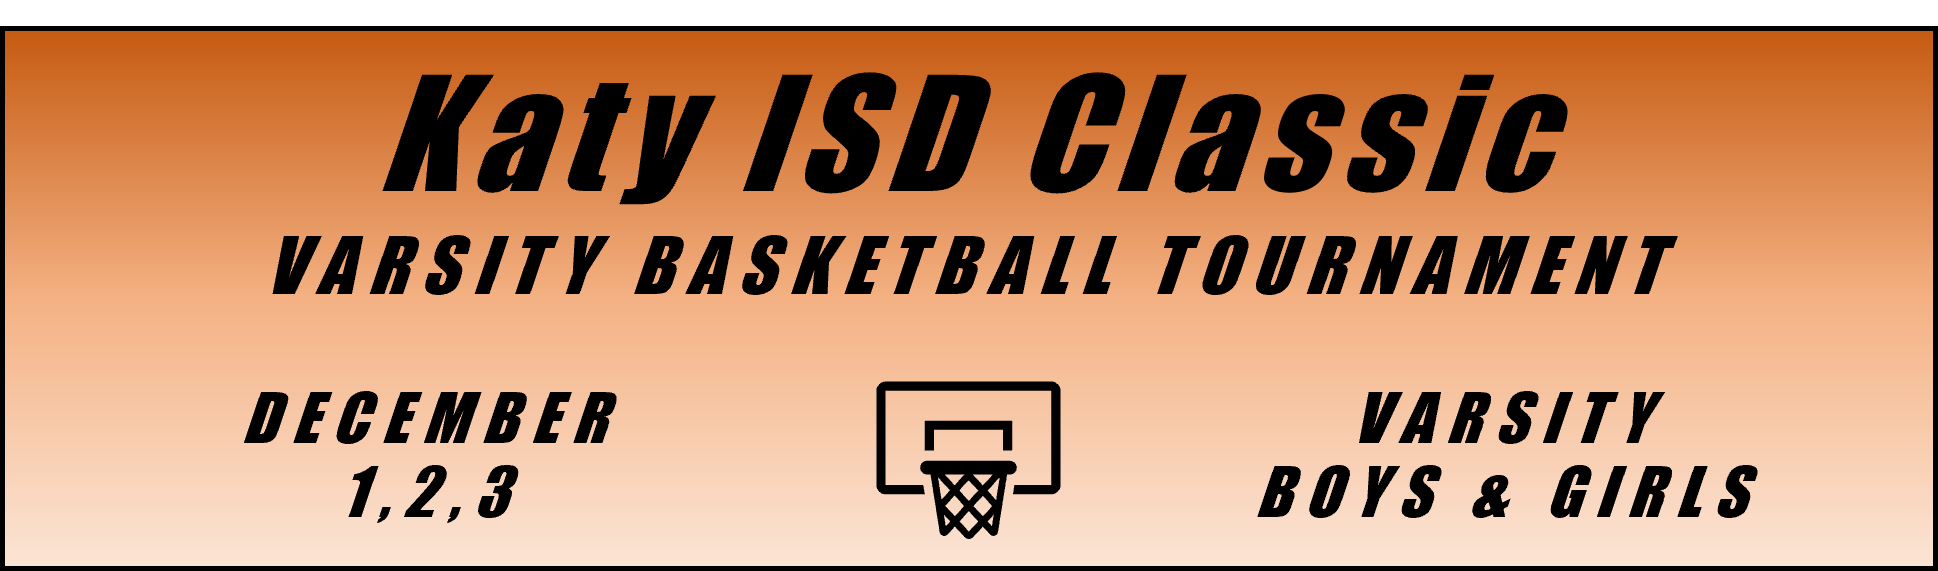 Katy ISD Classic 12/3 Tickets, refer to schedule for locations